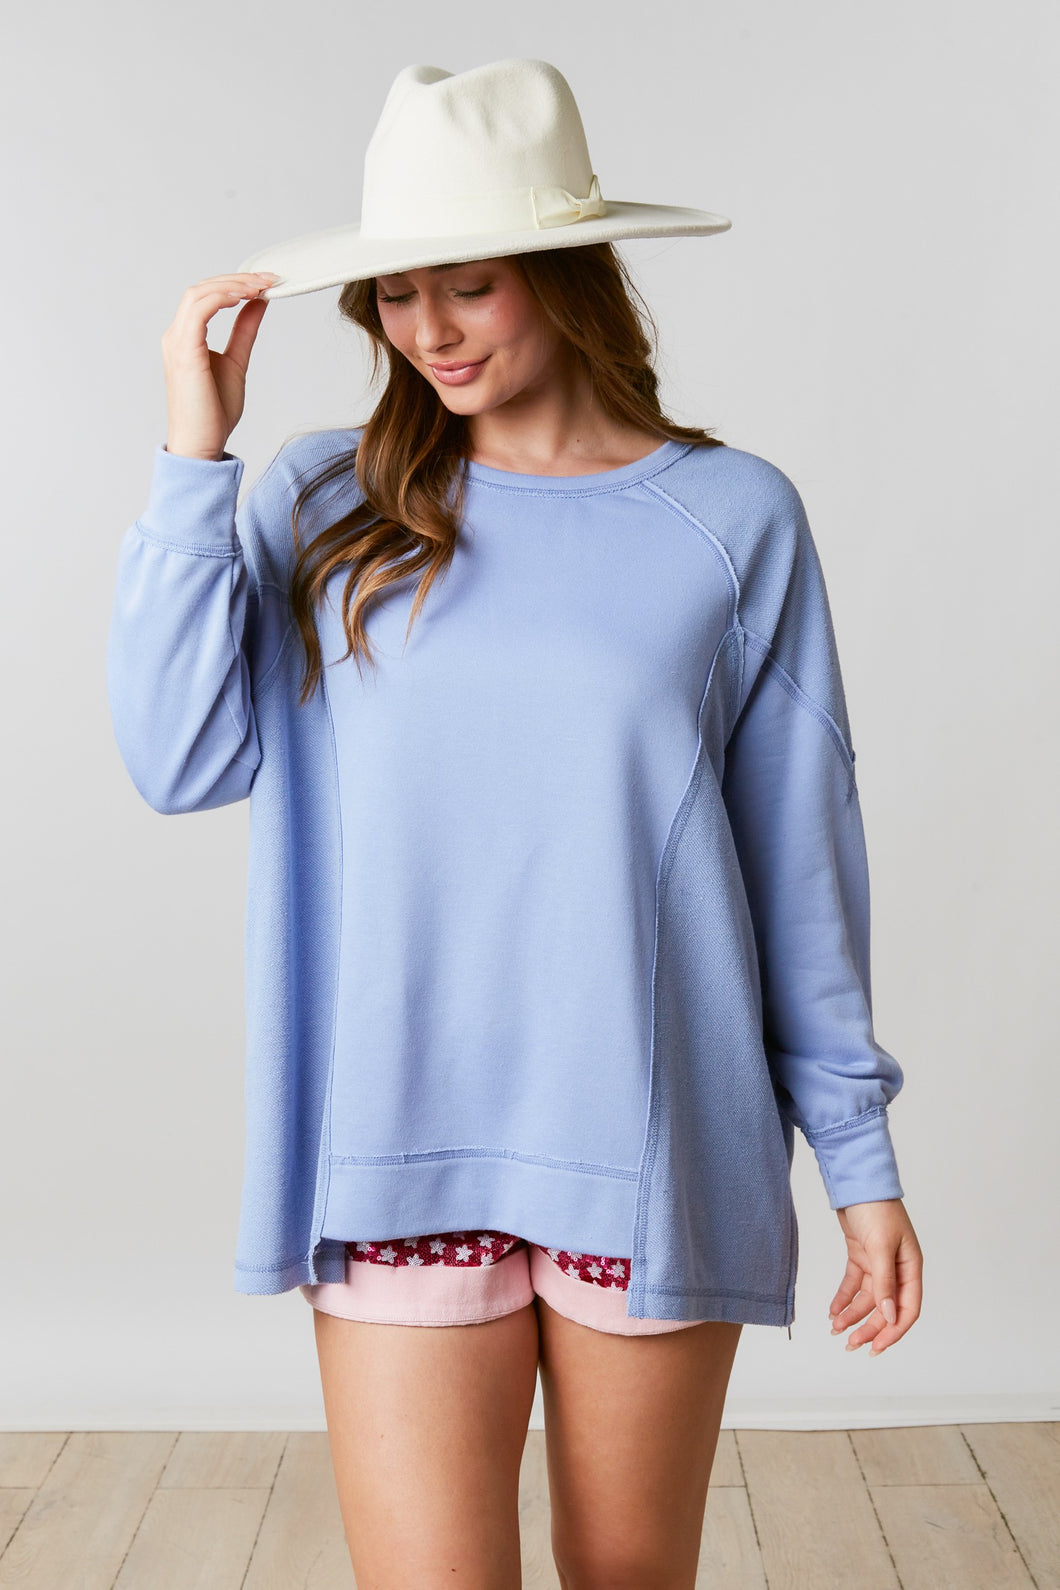 Fantastic Fawn Pull Over With Side Zipper Details in Light Blue Shirts & Tops Fantastic Fawn   